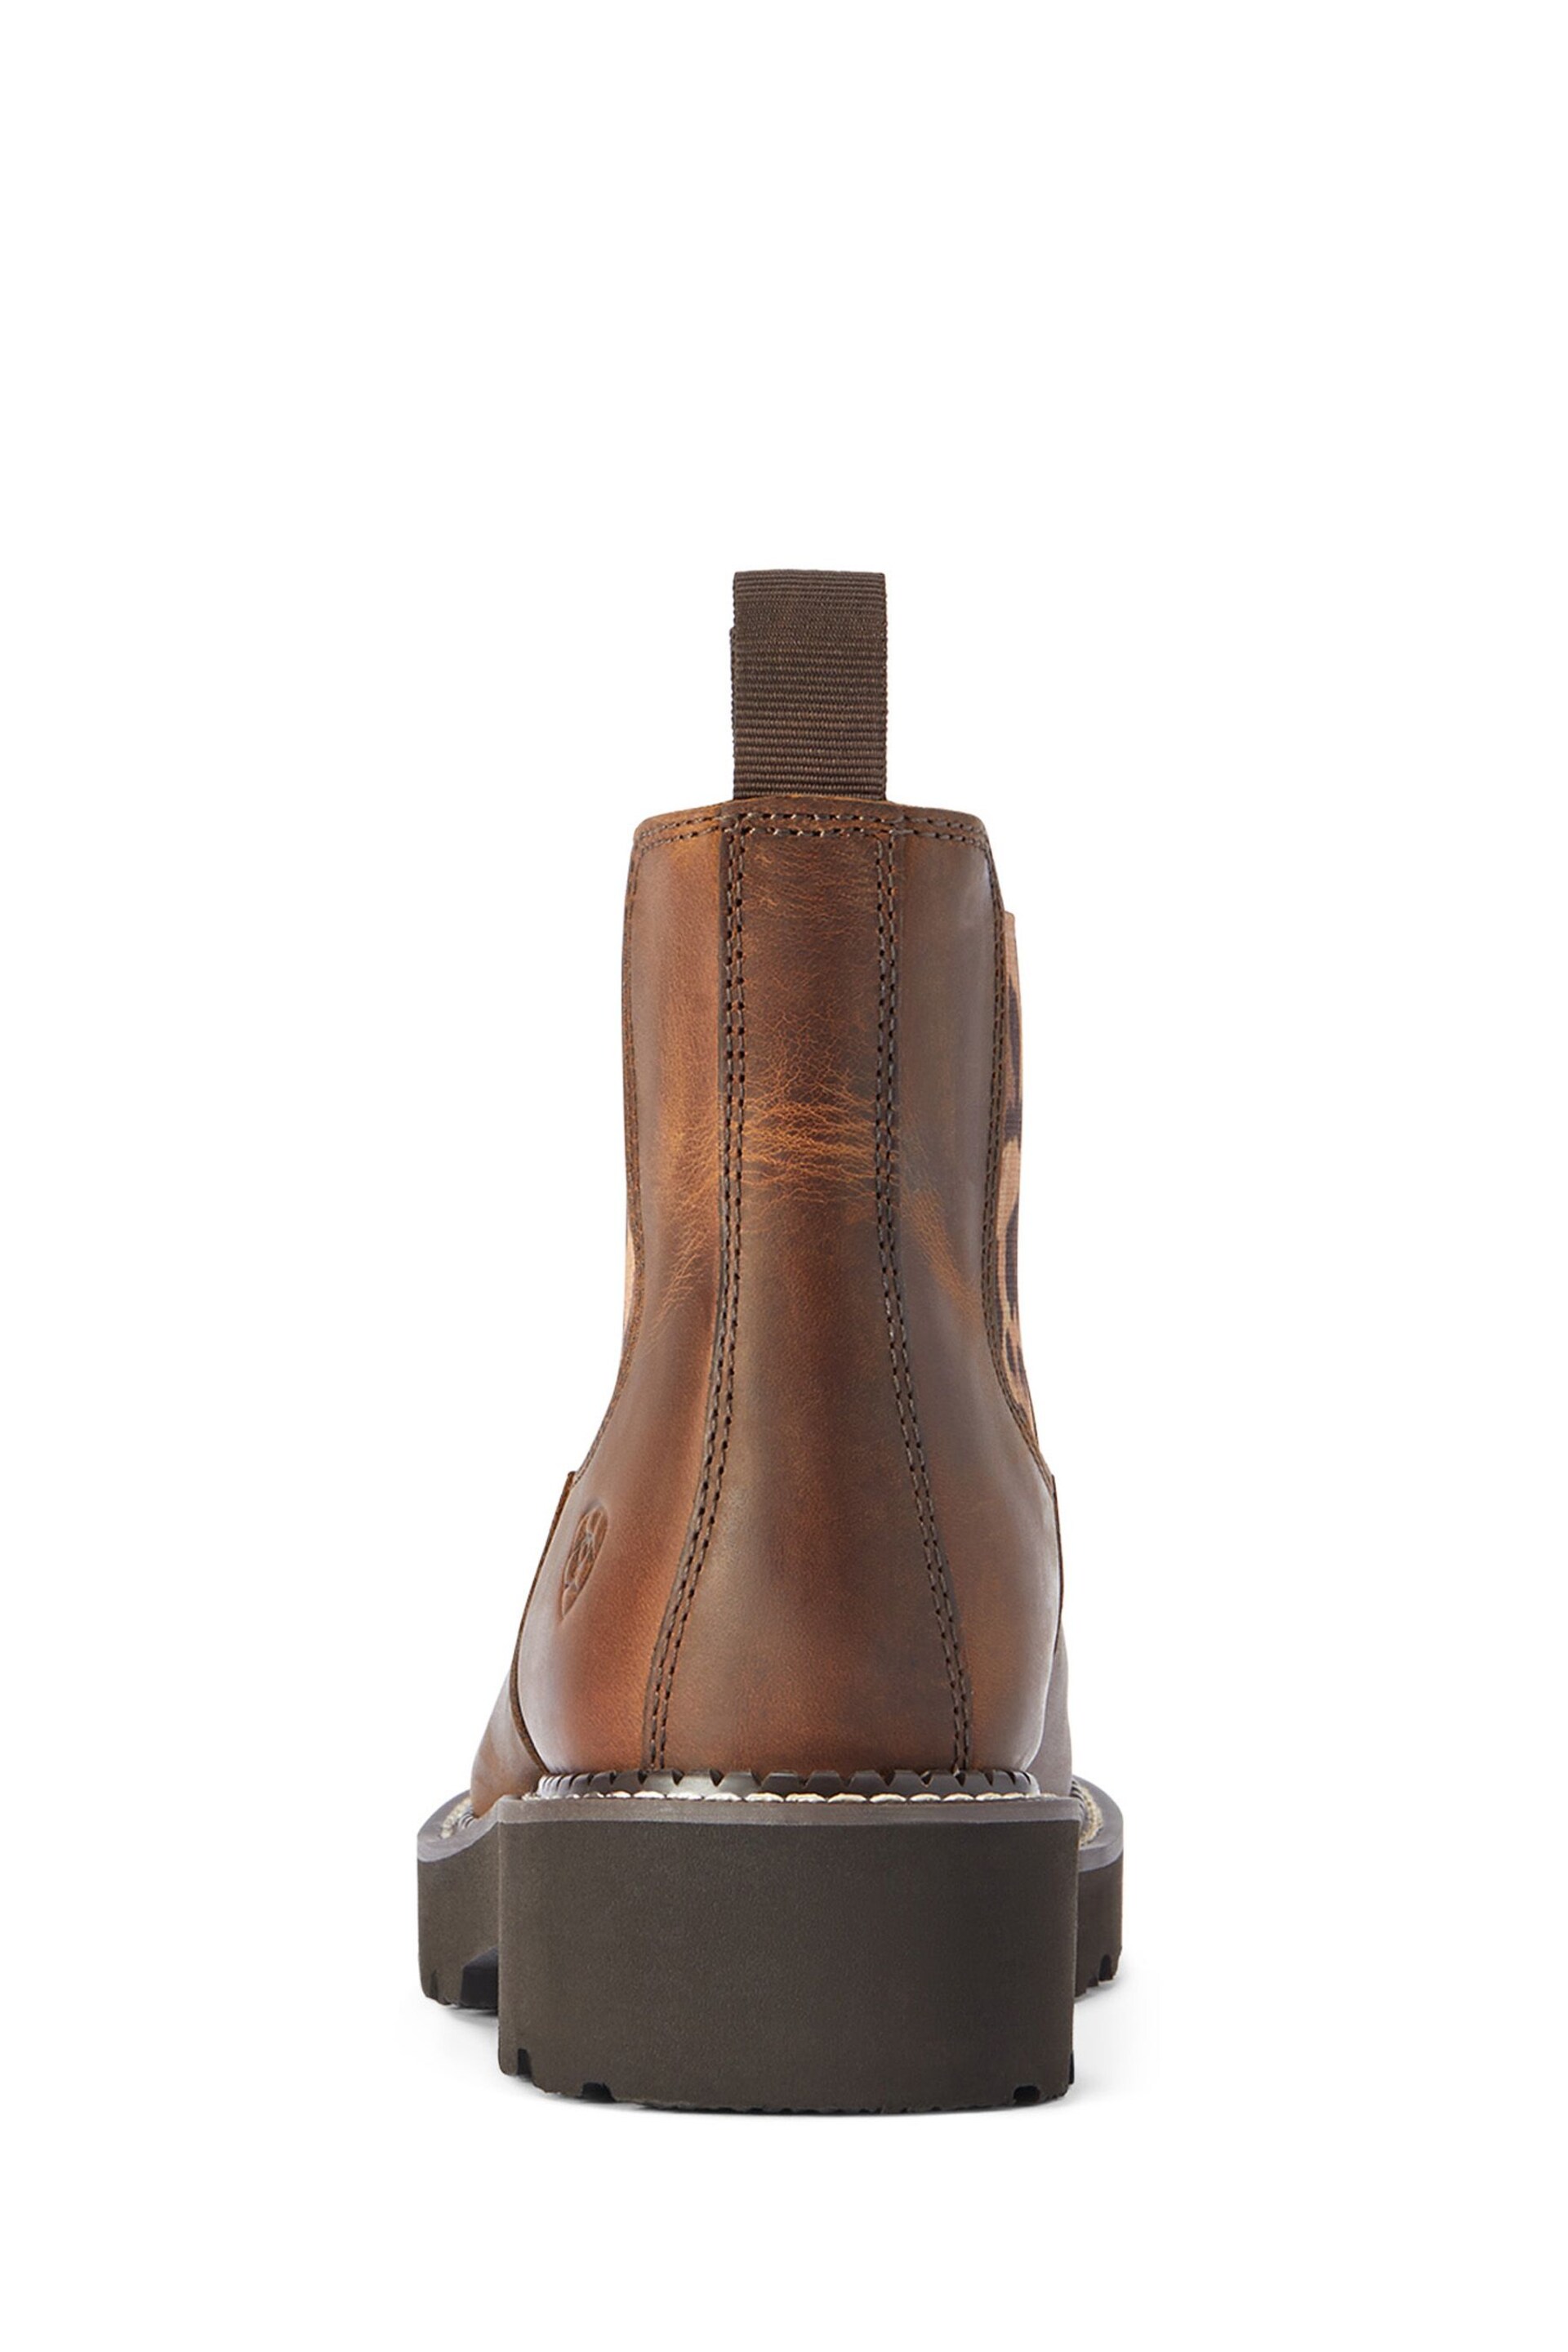 Ariat Fatbaby Twin Gore Brown Boots - Image 3 of 4